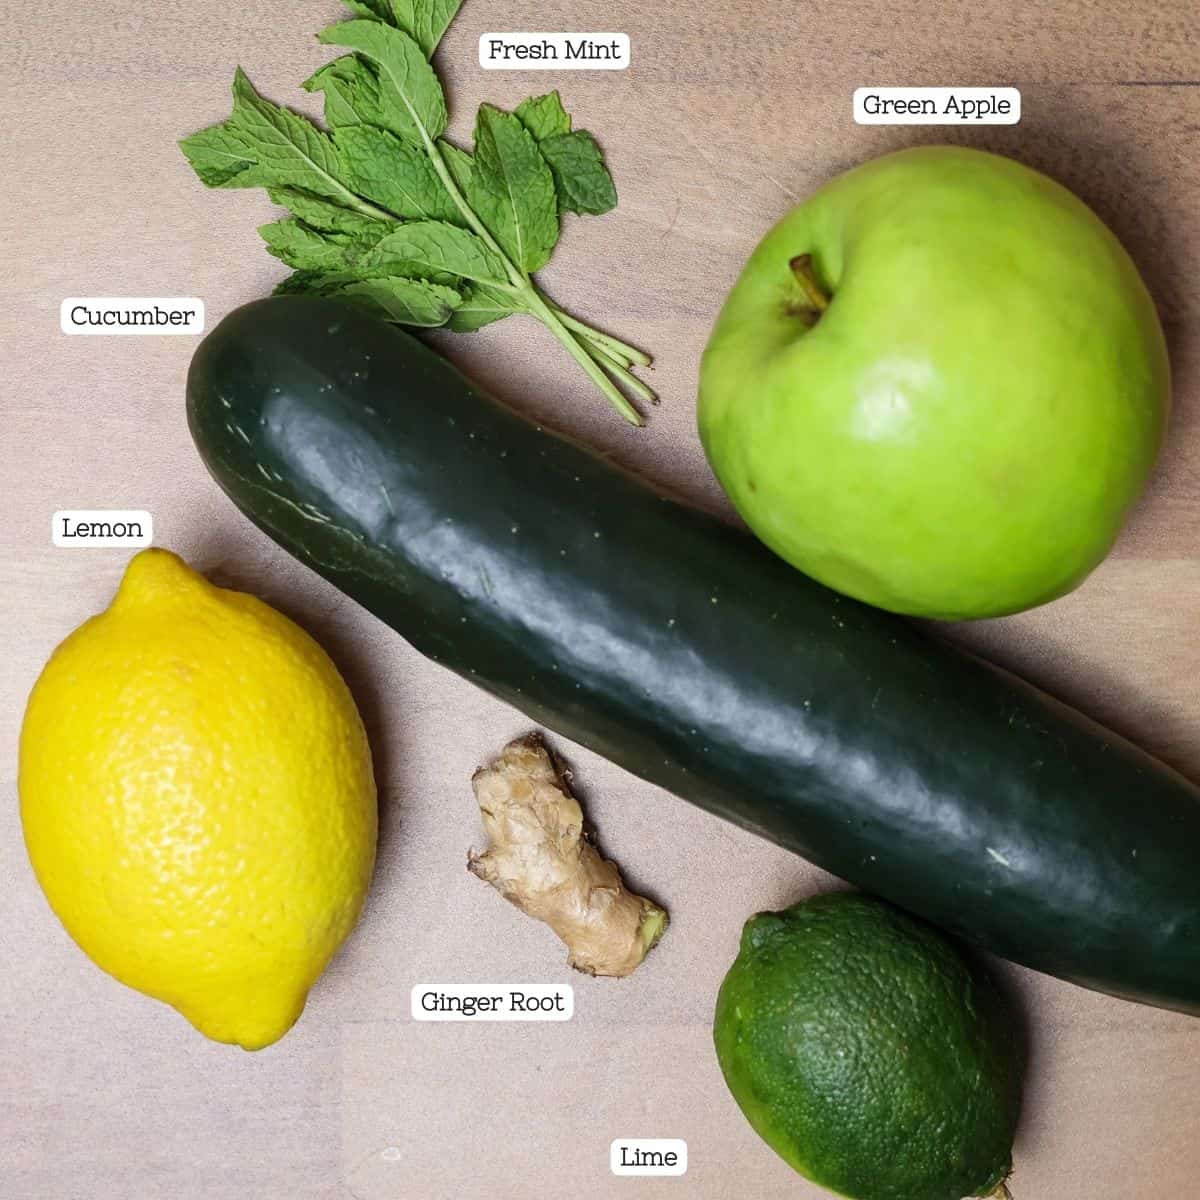 Ingredients for cucumber juice arranged on a wooden surface: a cucumber, a lemon, a lime, a piece of ginger root, a green apple, and fresh mint leaves, each labeled.